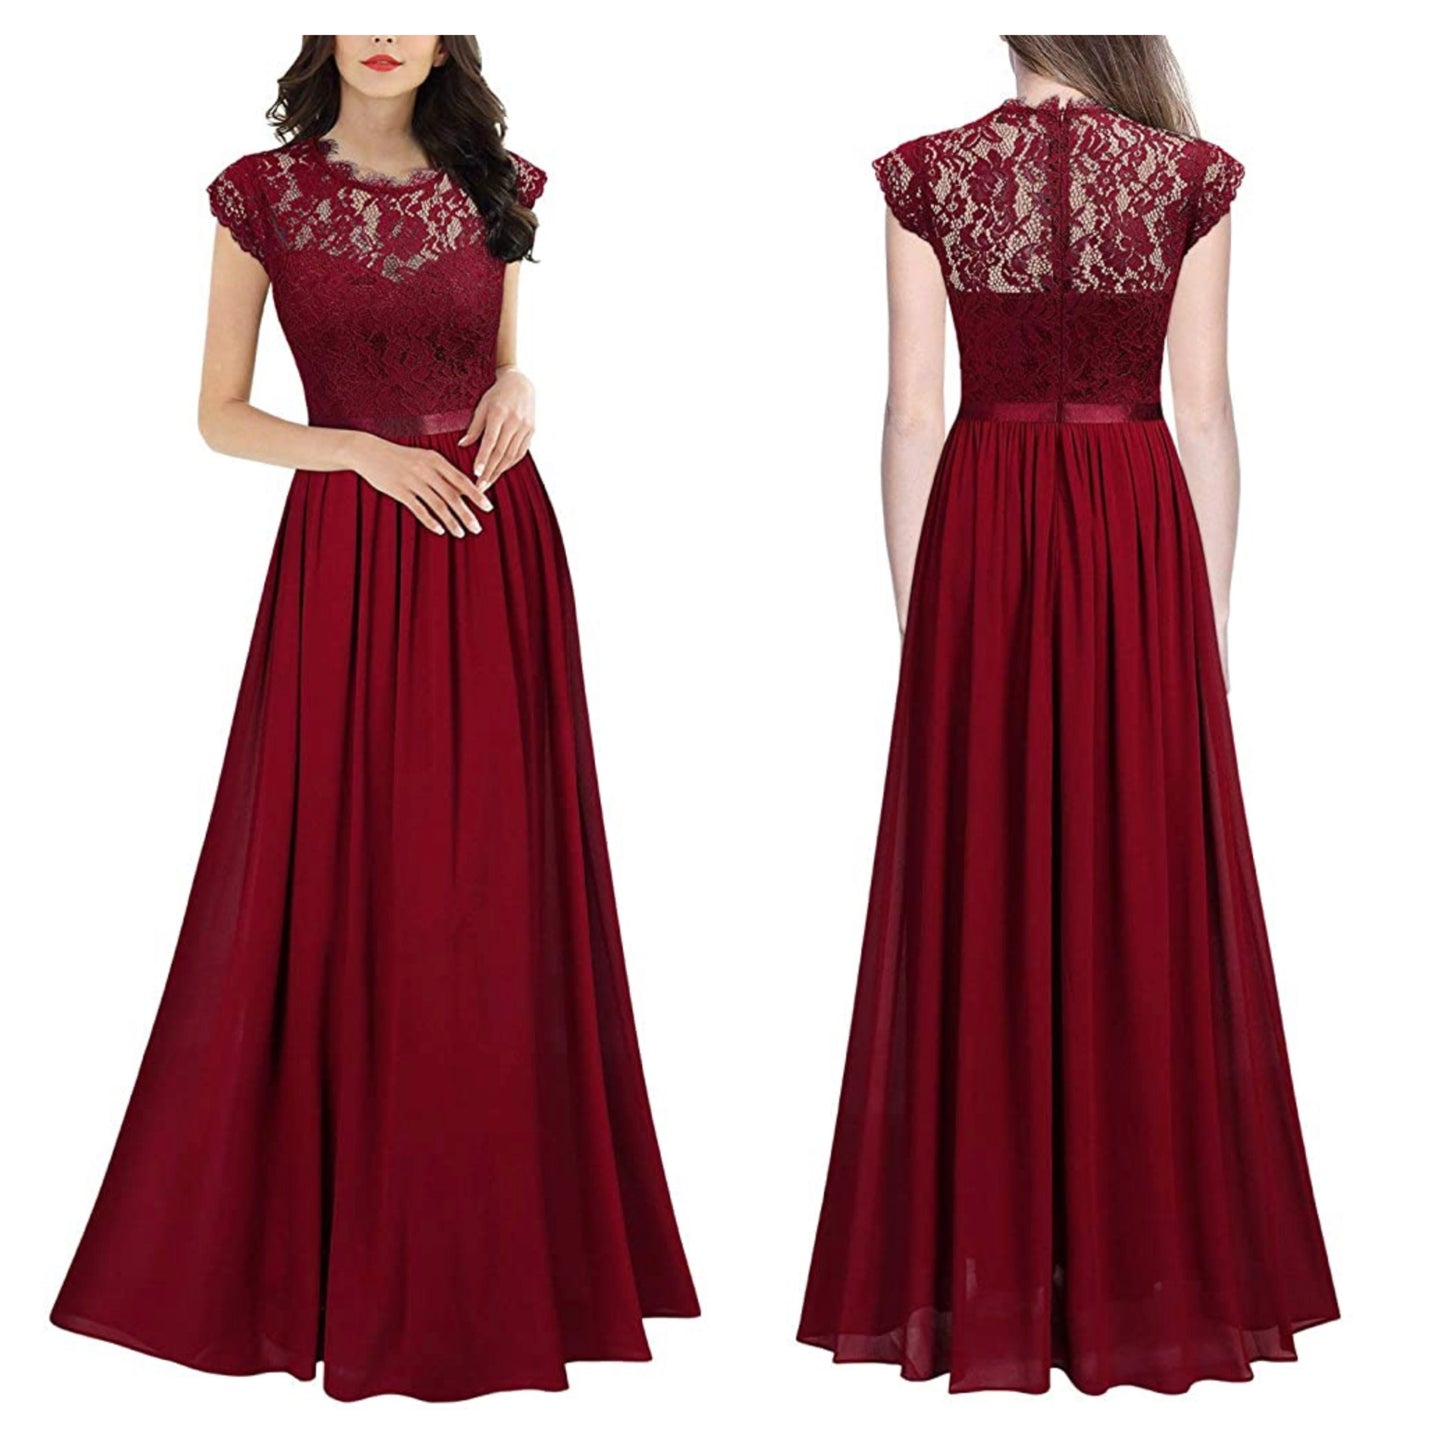 Floral Lace Long Length Dress, Sizes Small - 2XLarge (Red Dress)